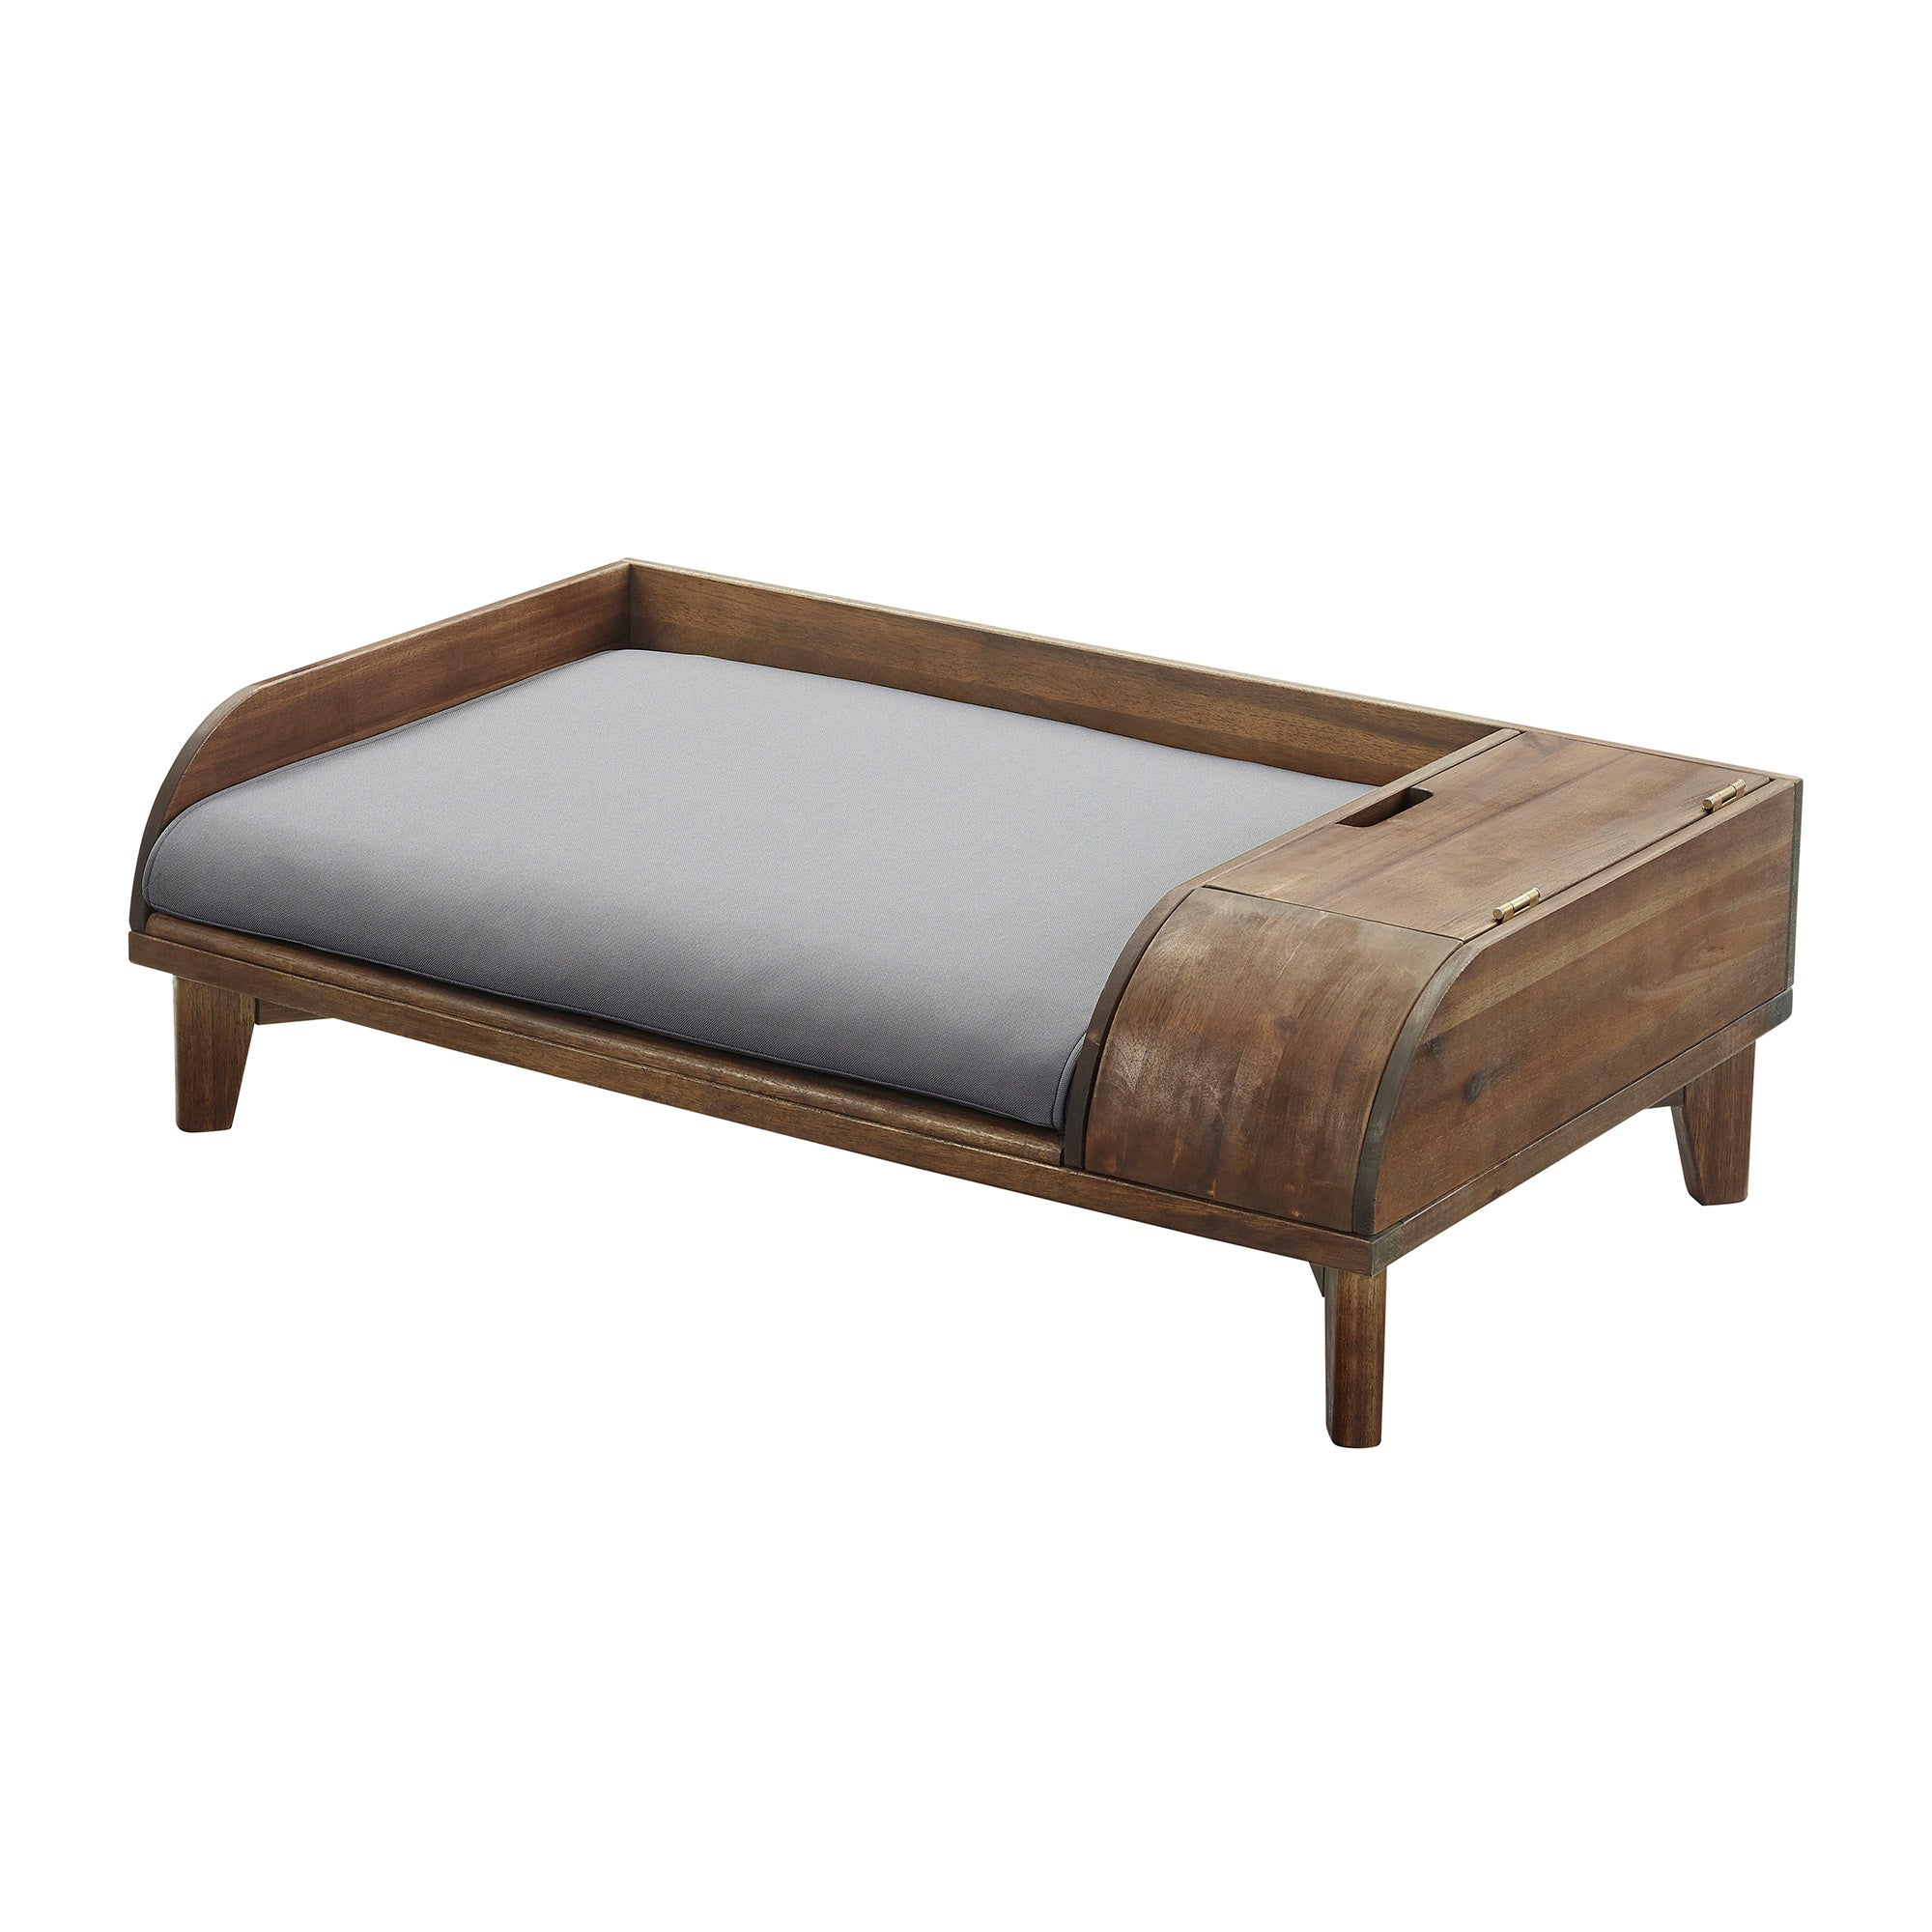 Mia Medium Solid Wood Storage Pet Bed with Cushion - East Shore Modern Home Furnishings